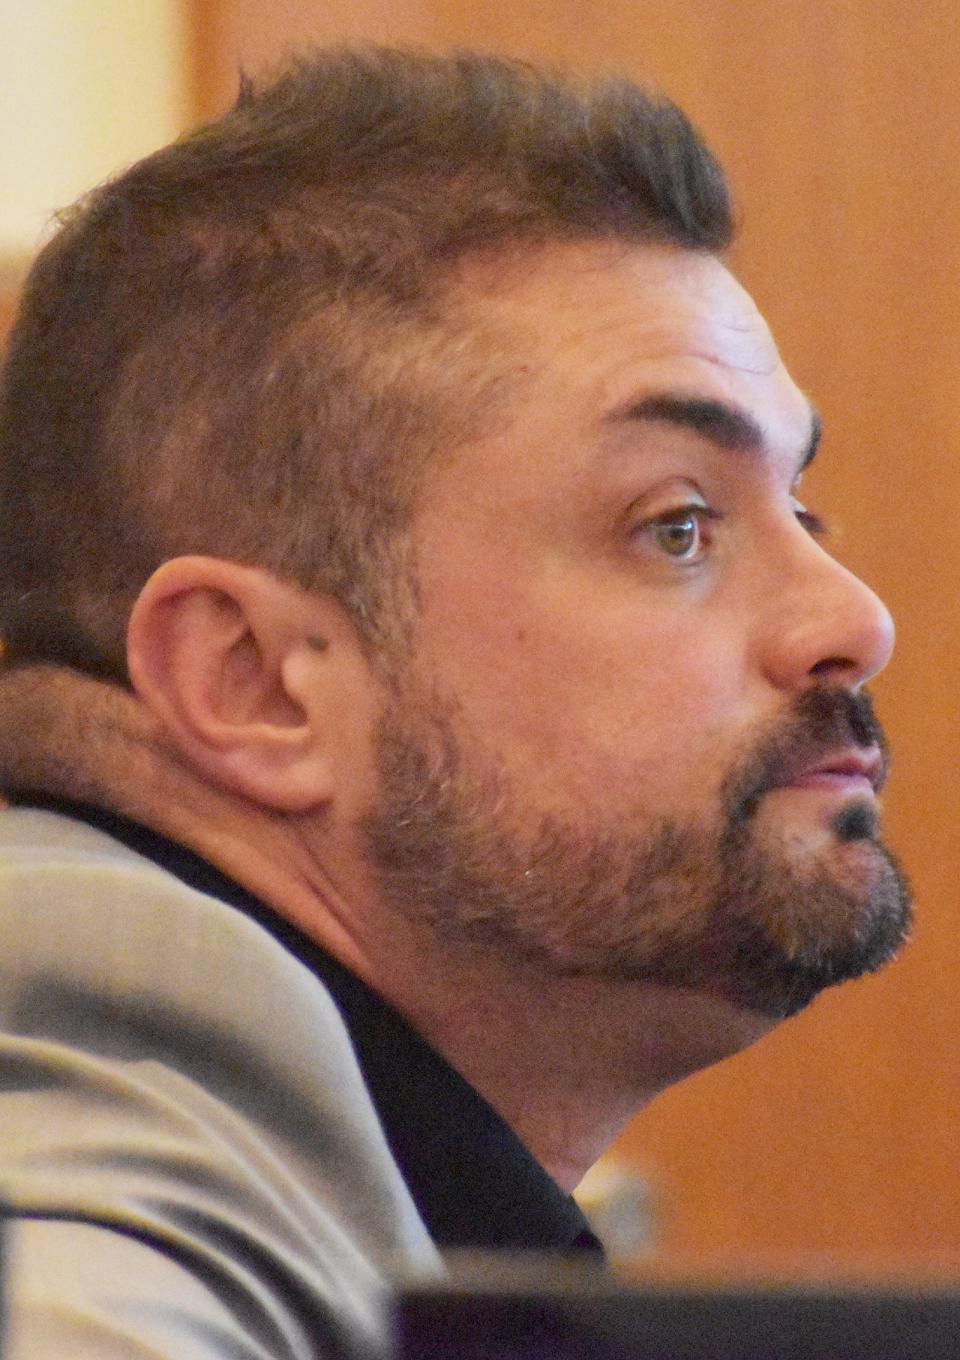 Former Fall River police officer Michael Pessoa listens to the proceedings of his trial in court on Tuesday, May 23.